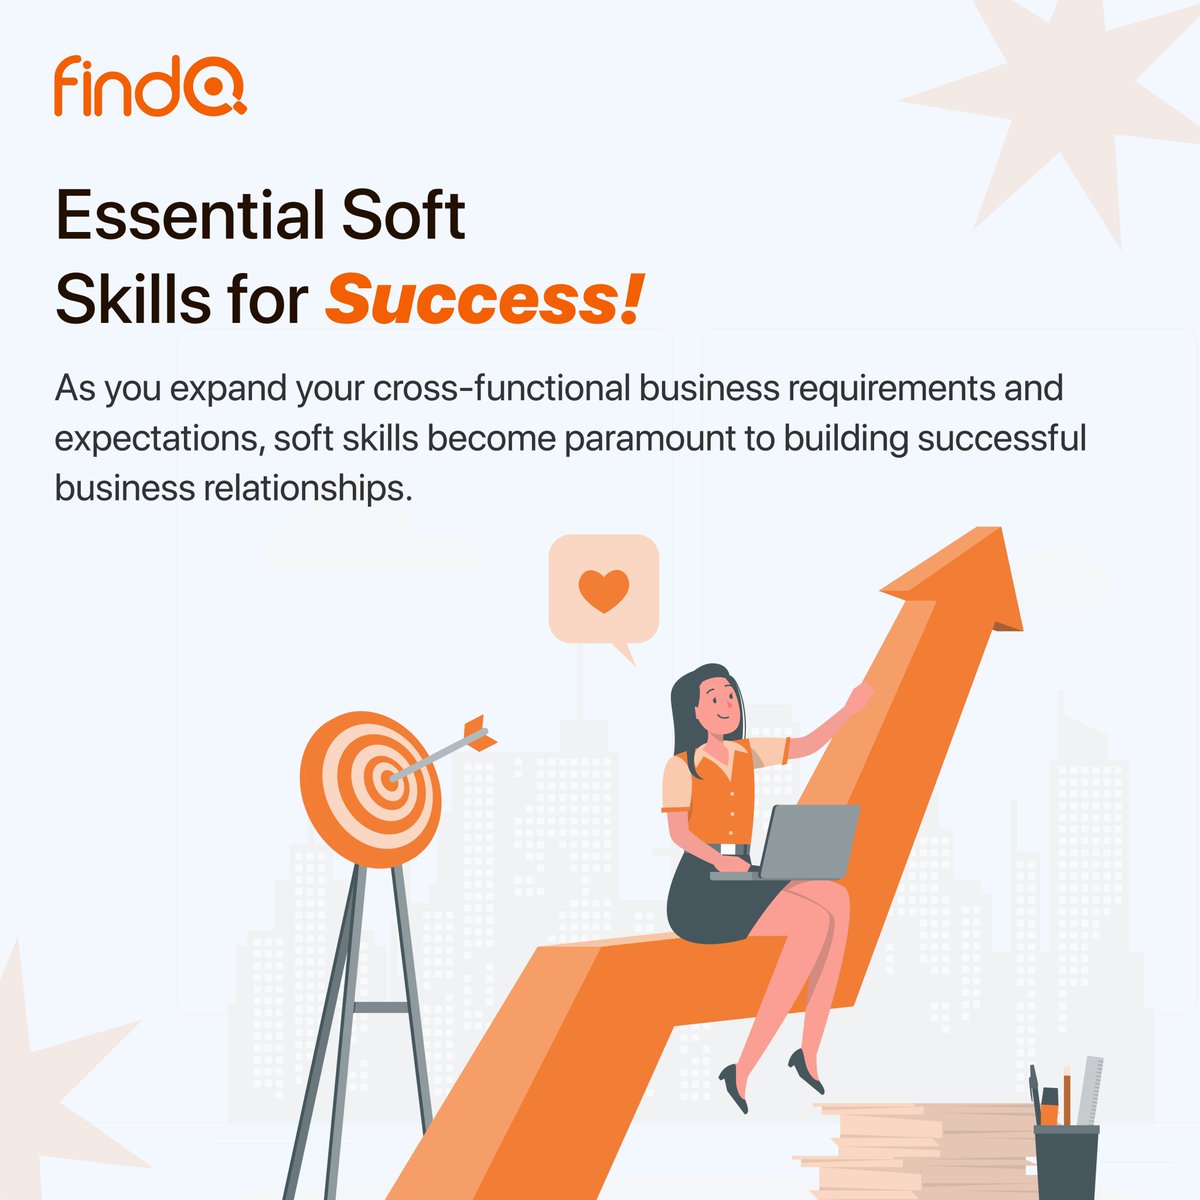 Soft skills are difficult to measure or quantify.

They are essential for success in a wide range of industries and professions.

Interpersonal dynamics and building strong relationships are the key to.

#findq #softskills #recruitment #jobconsultancy #career